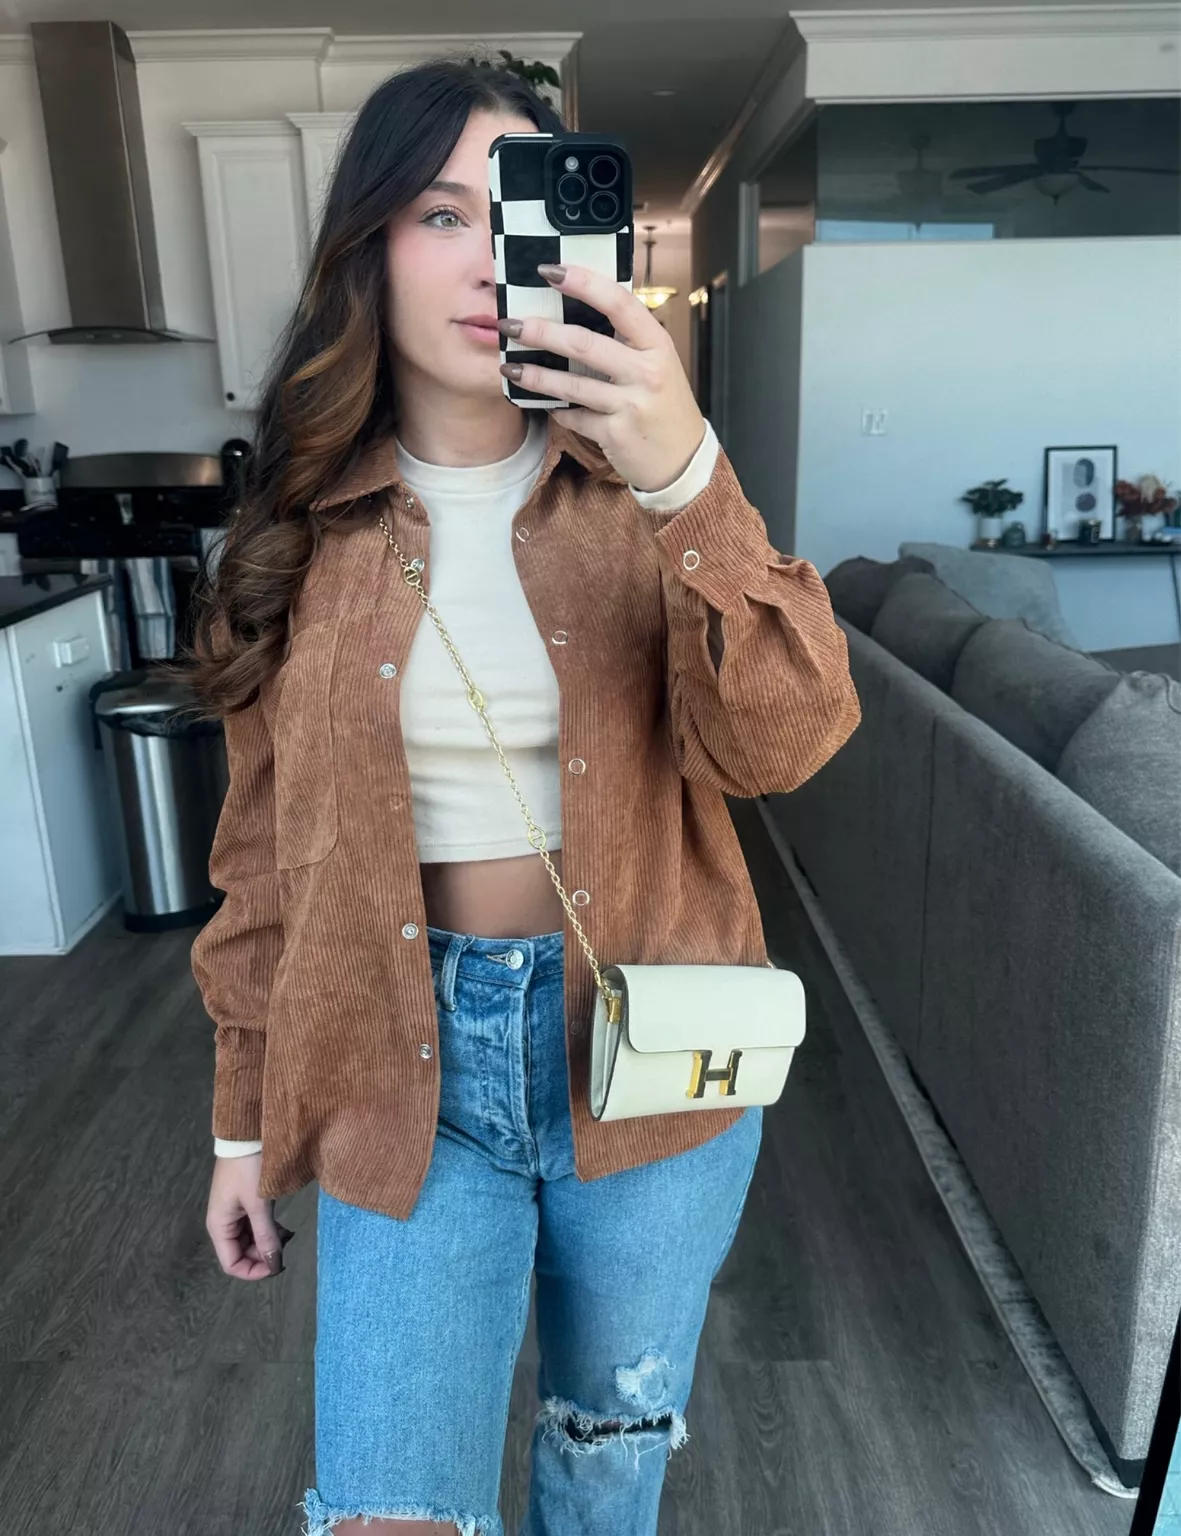 SHEIN USA  Jacket outfit women, Cropped jacket outfit, Baseball